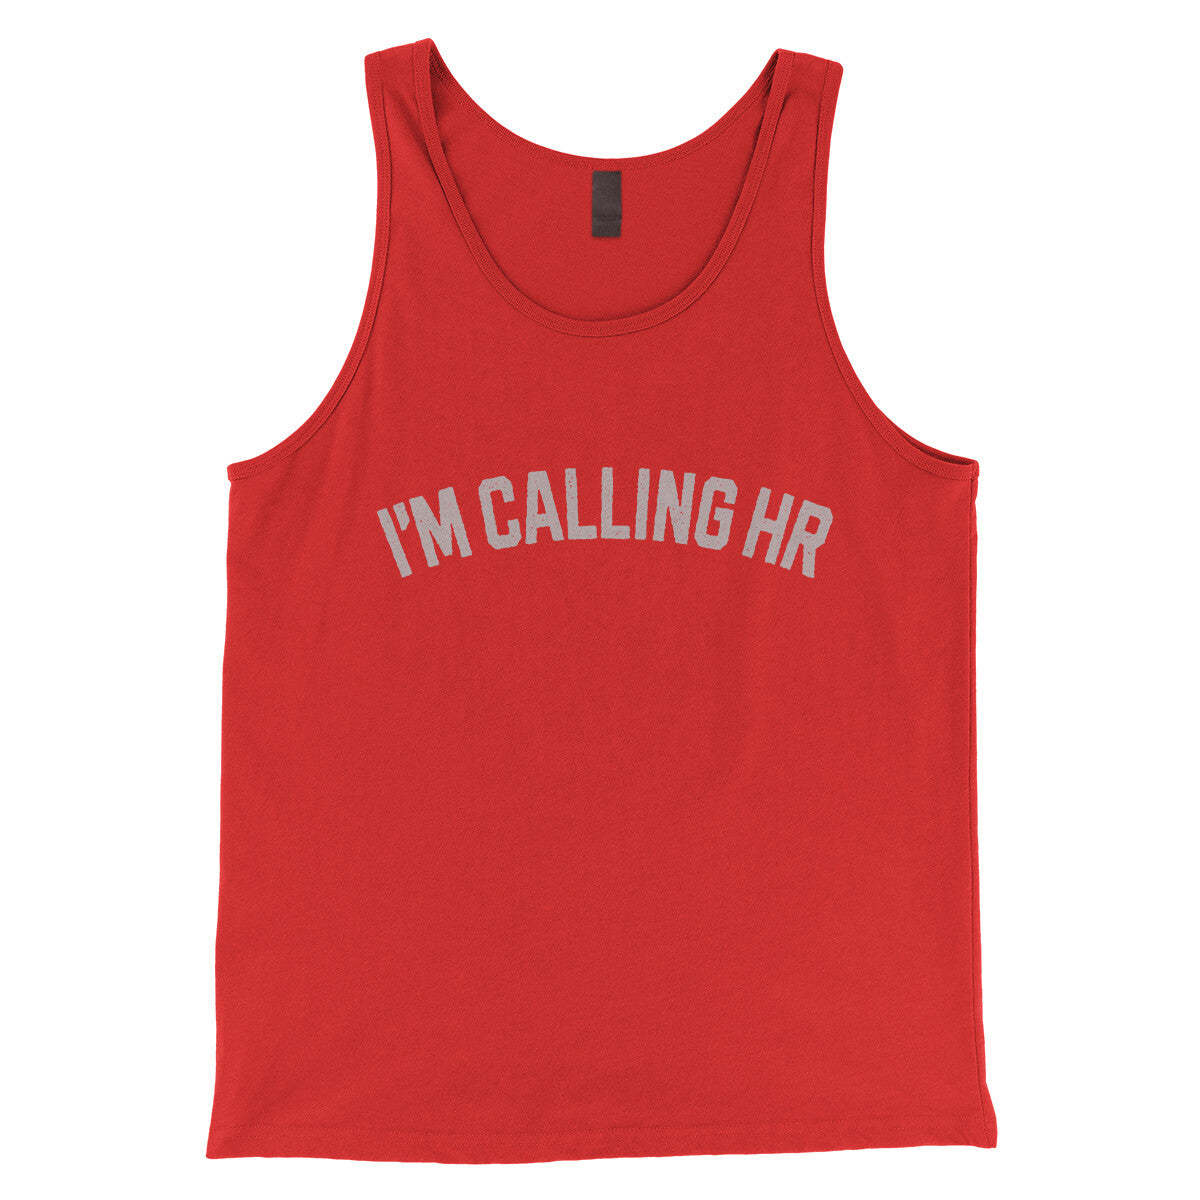 I'm Calling HR in Red Color